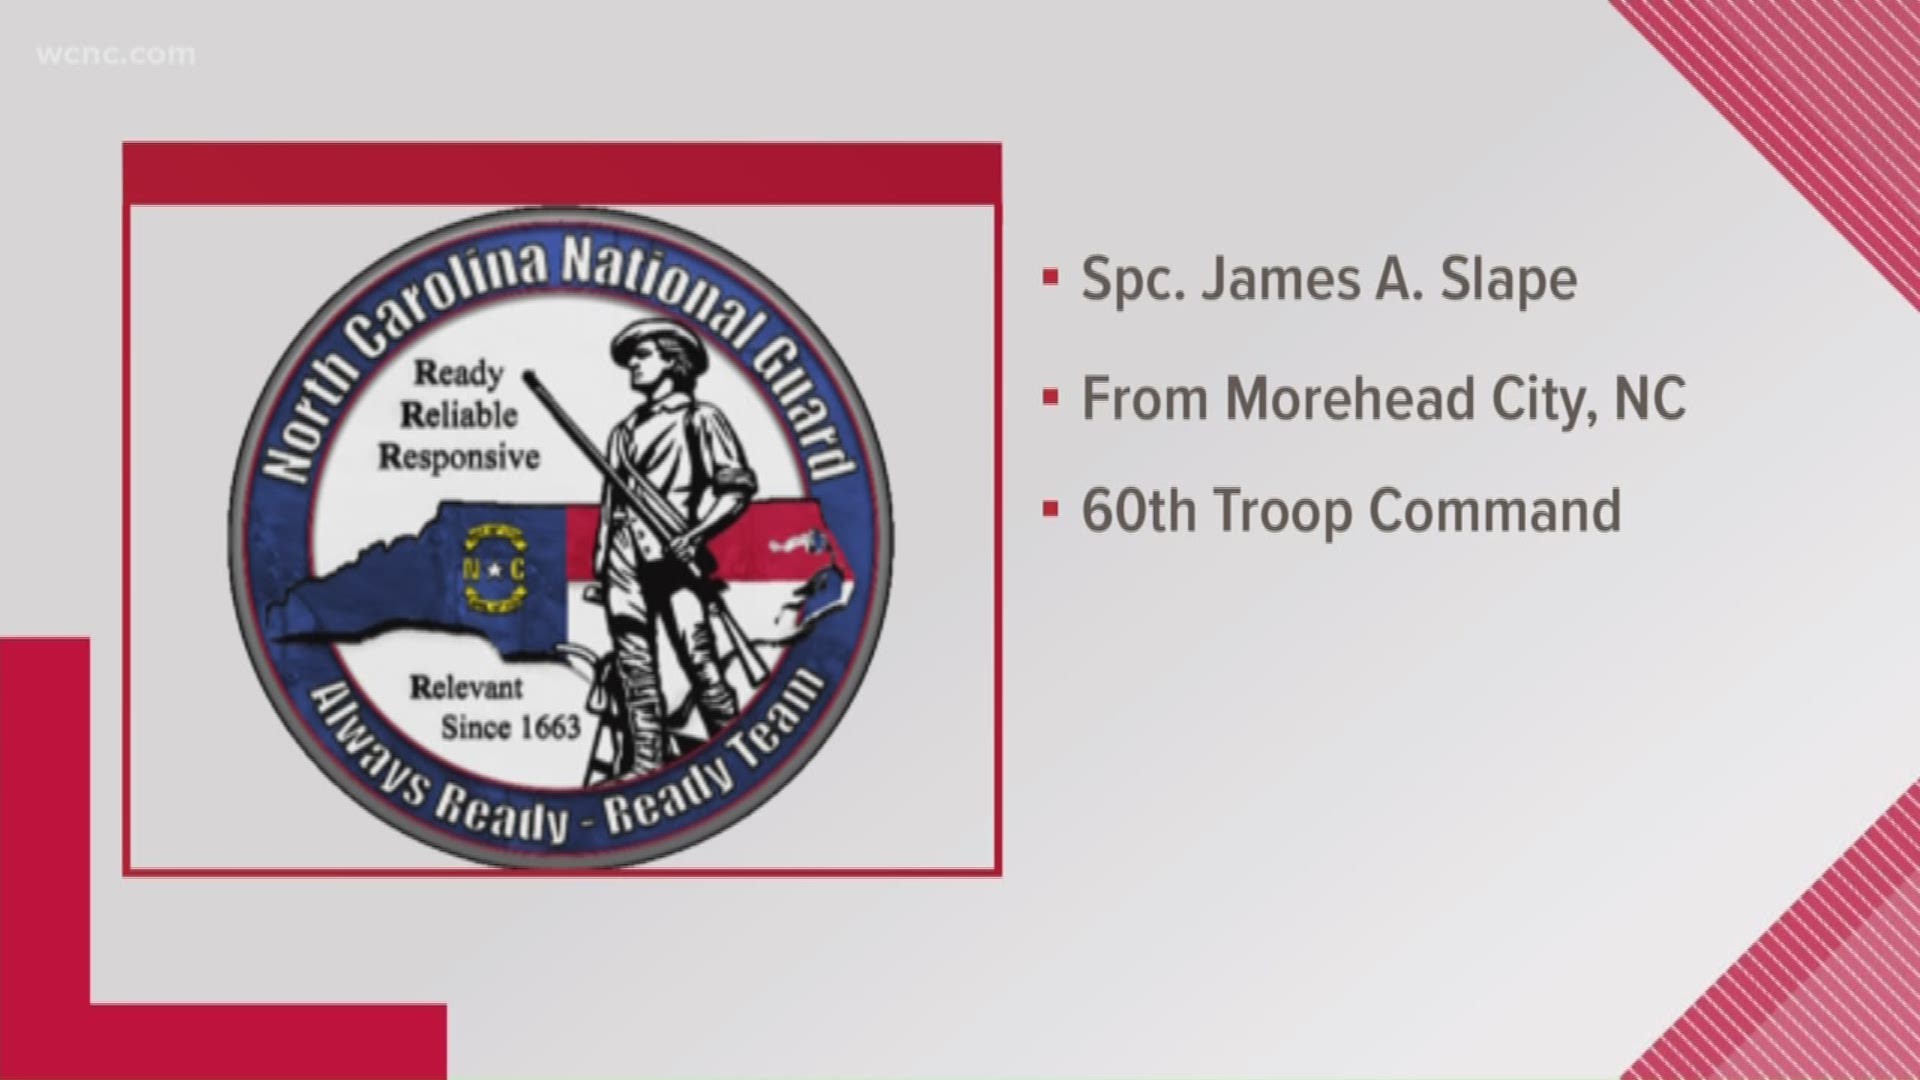 Sgt. James A. Slape is from Morehead City, N.C.